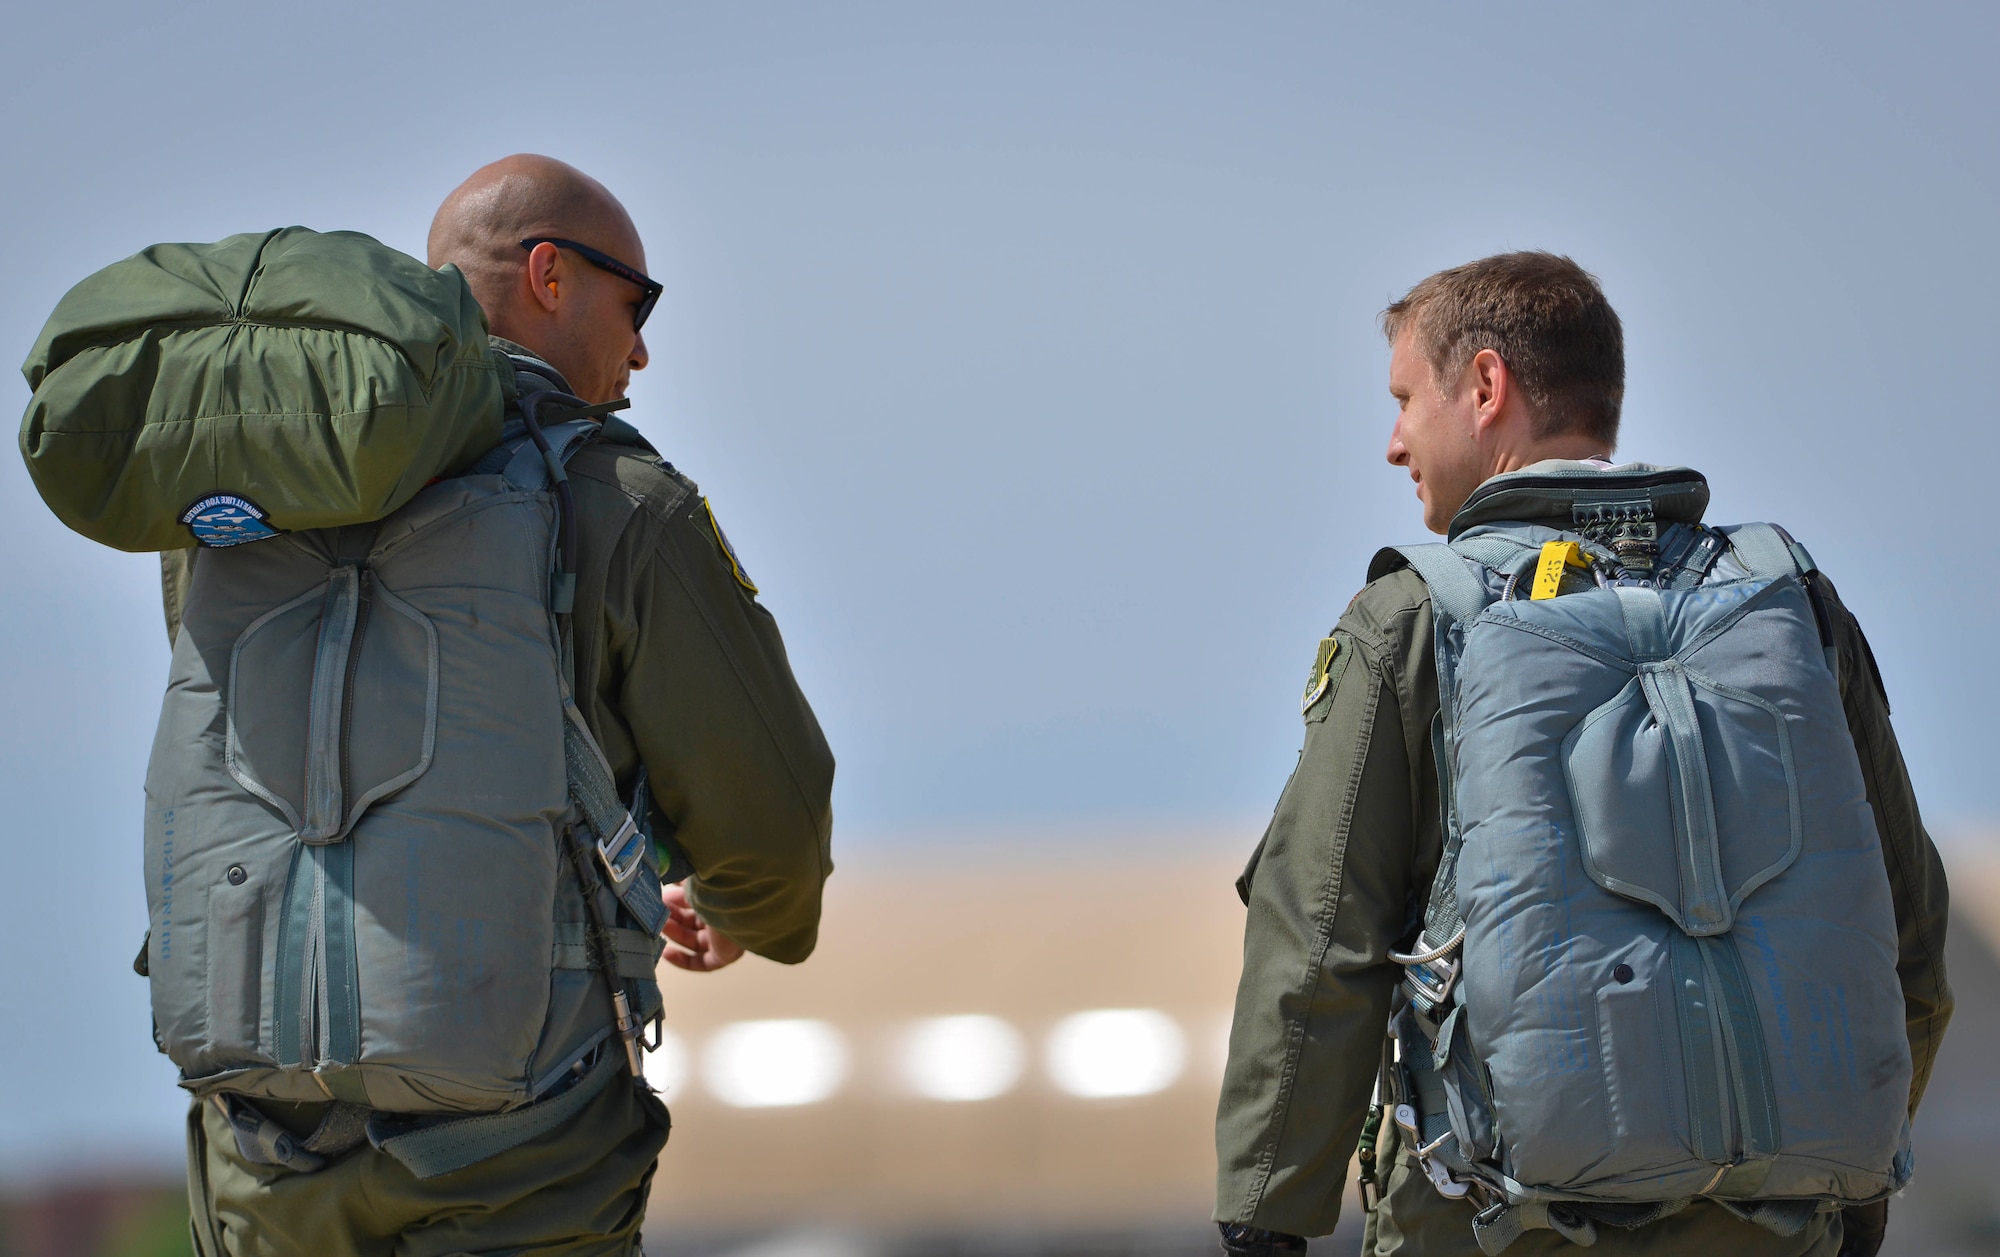 (From left) U.S. Air Force 1st Lt. Edward Galloway and Maj. Nathaniel Lightfoot, 71st Fighter Training Squadron aggressor pilots, return from an air combat training mission during ATLANTICTRIDENT 17 at Joint Base Langley-Eustis, Va., April 18, 2016. This exercise was designed to encourage
the sharing and development of air combat practices with both the French and Royal air force against a range of potential threats. (U.S. Air Force photo/Staff Sgt. Natasha Stannard)